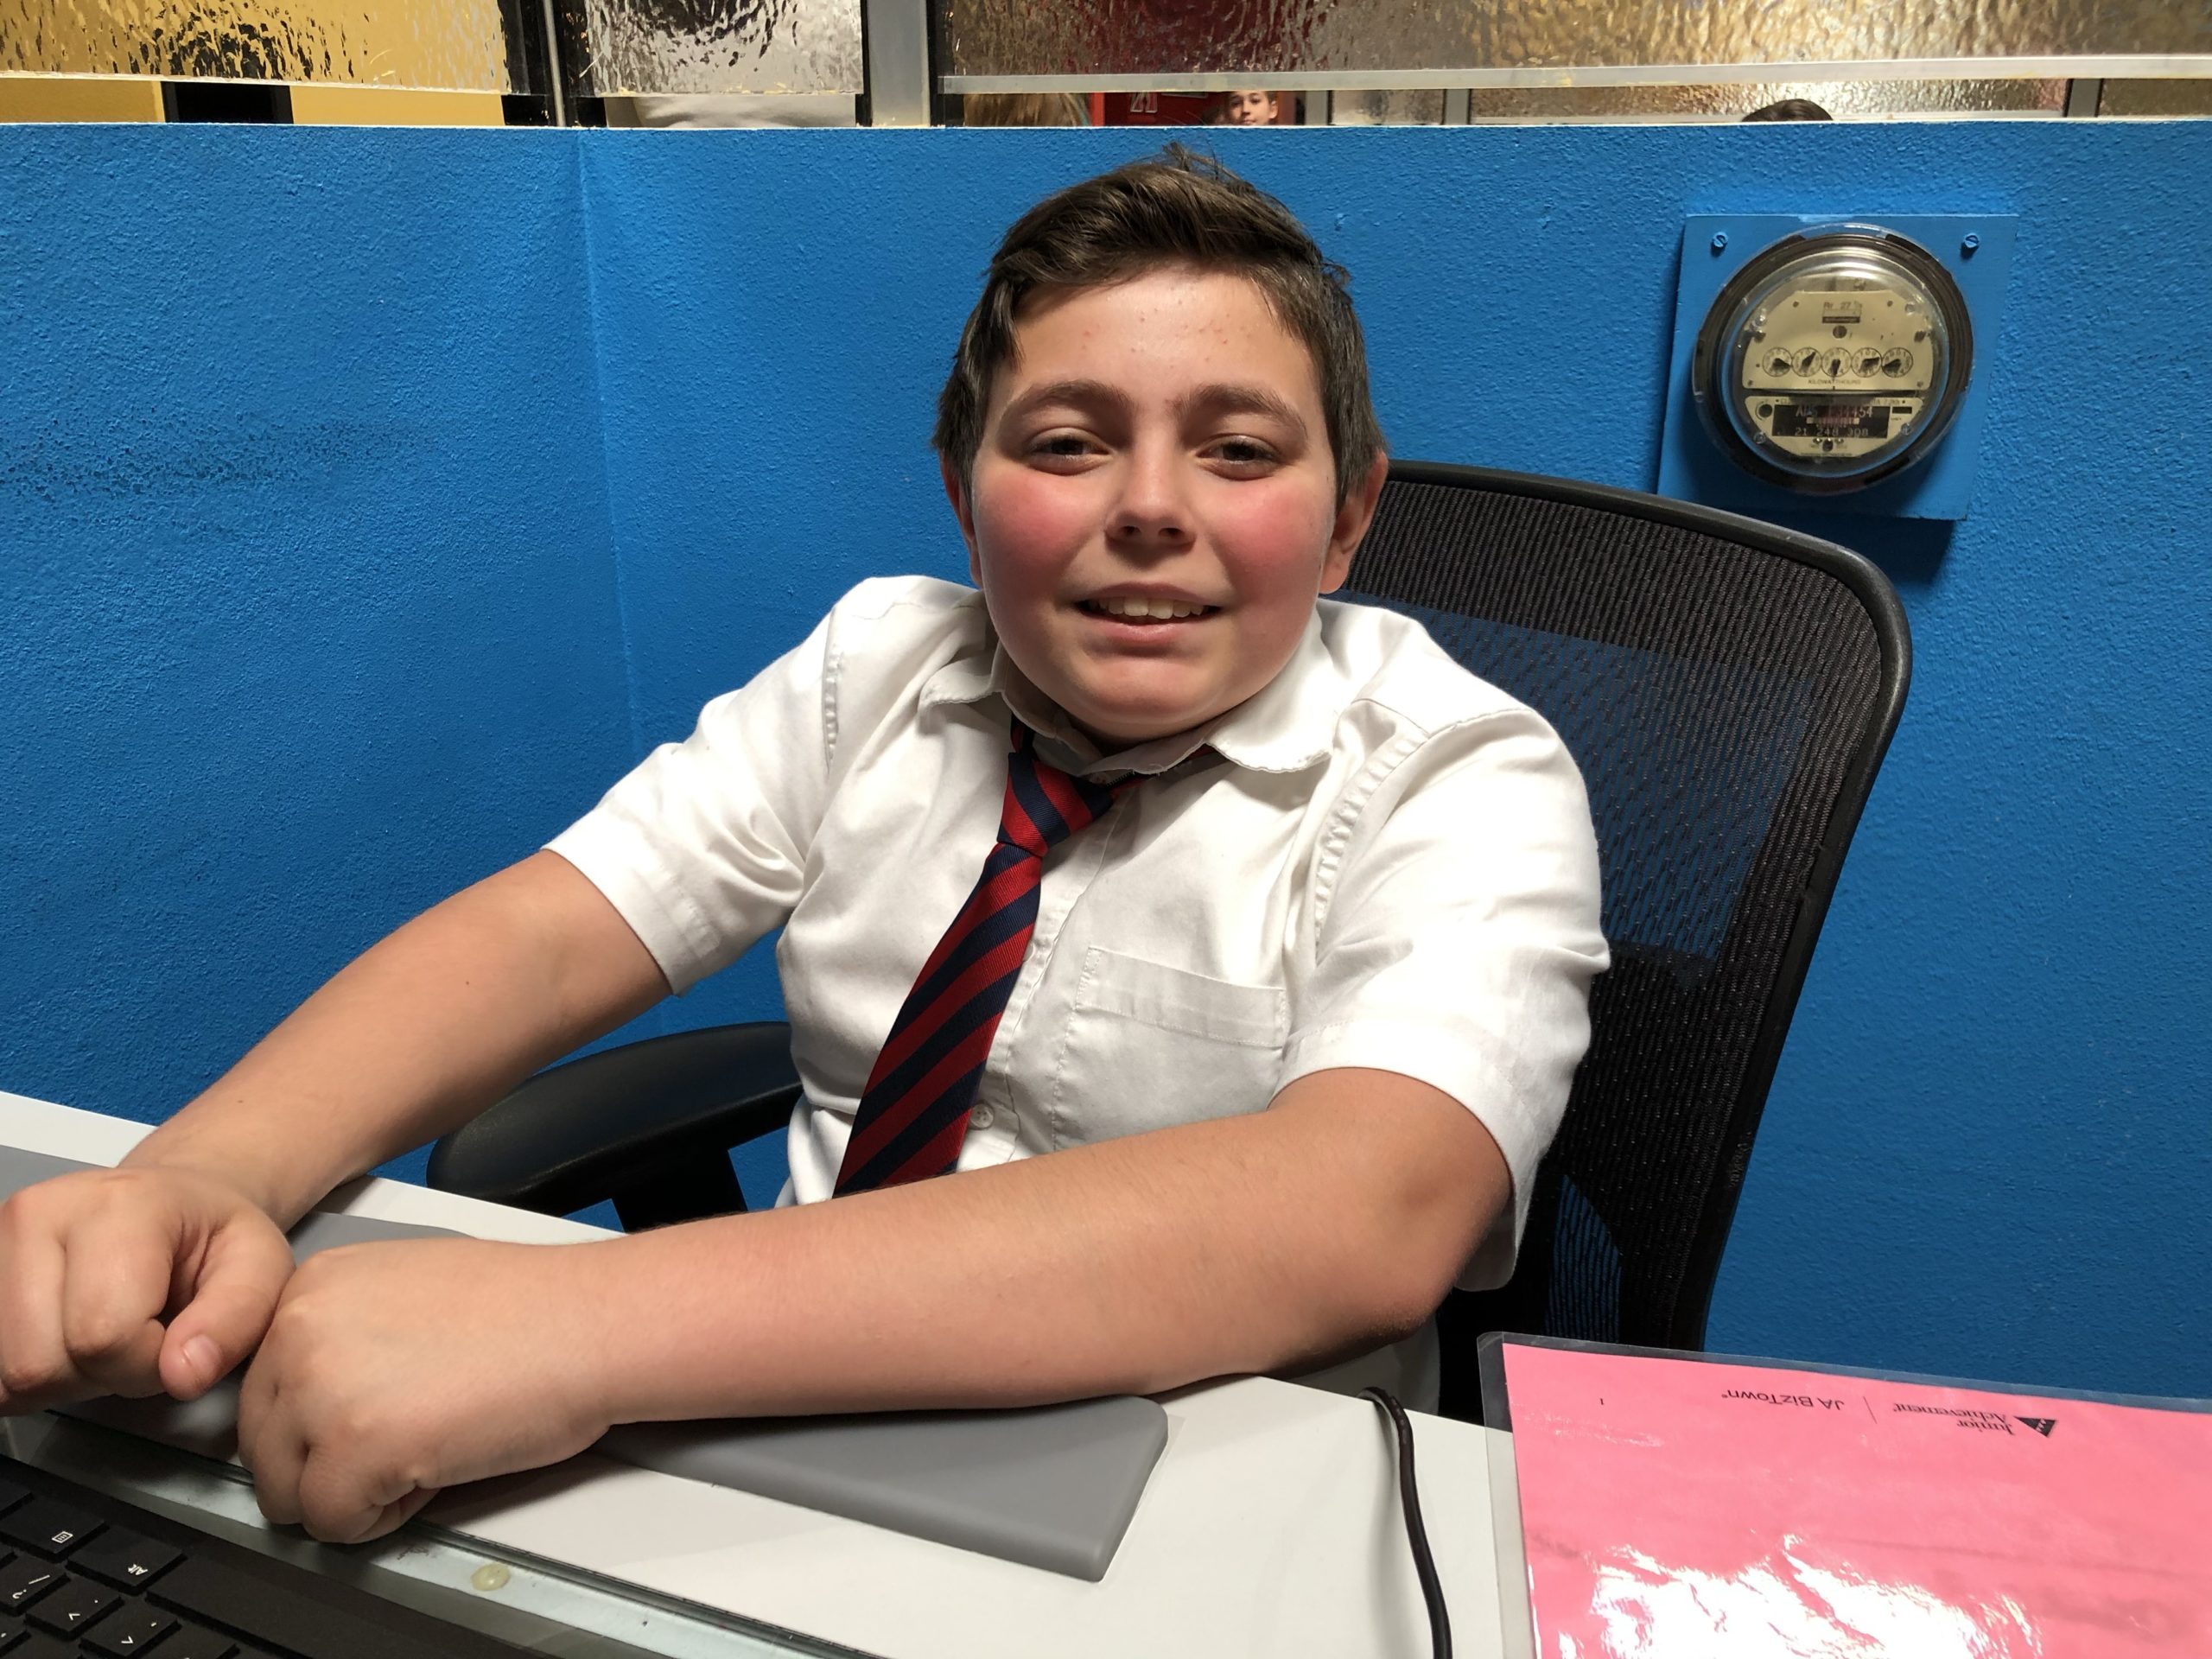 young boy sitting at desk wearing a tie